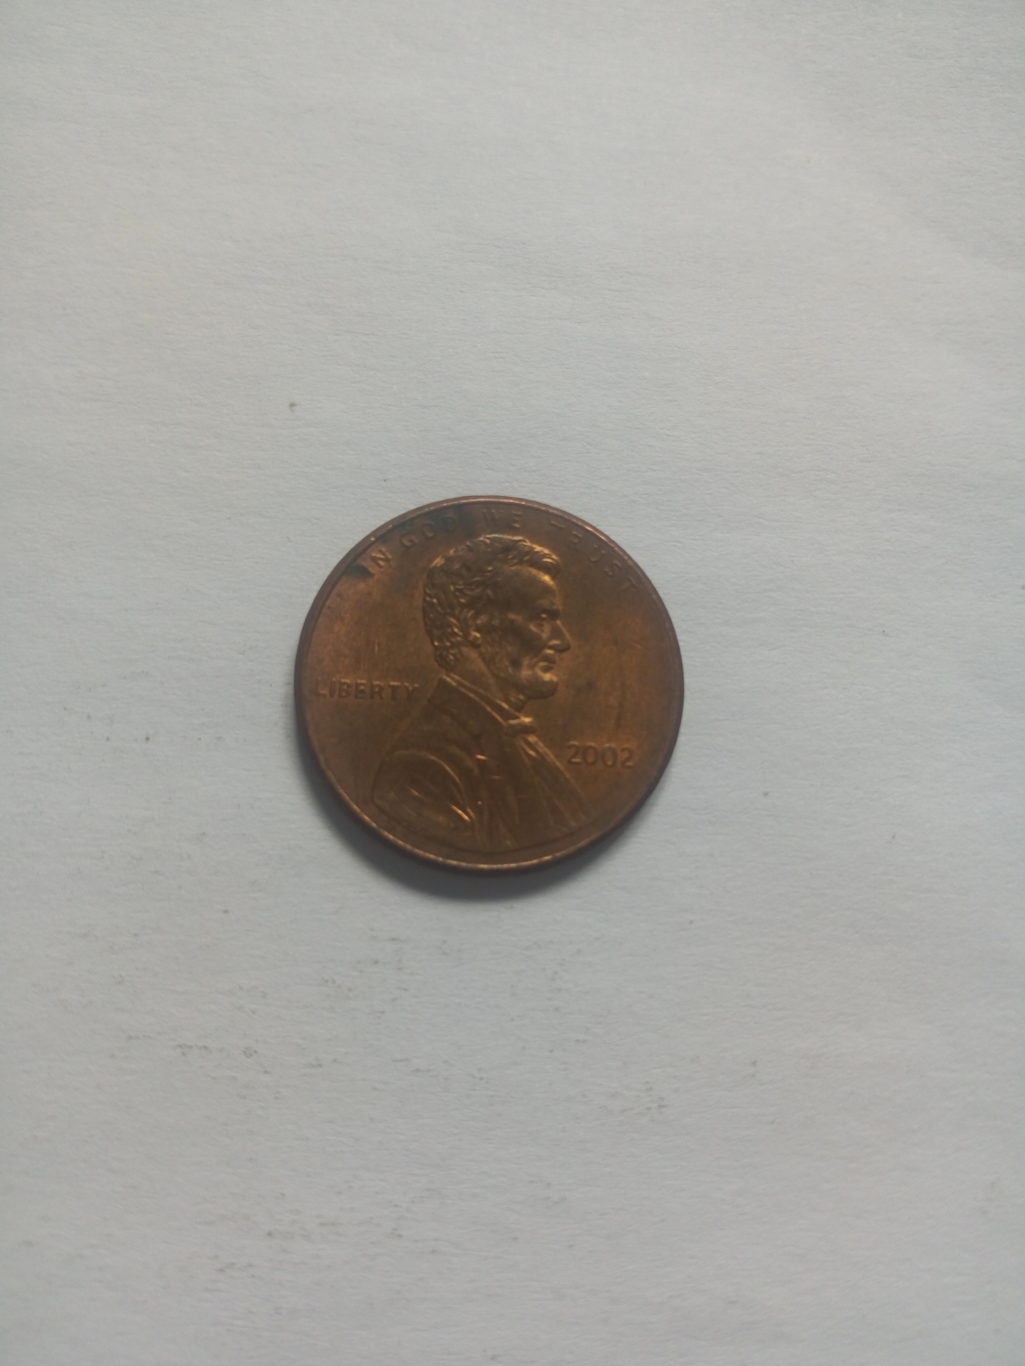 2002_ united states of america 1 cent